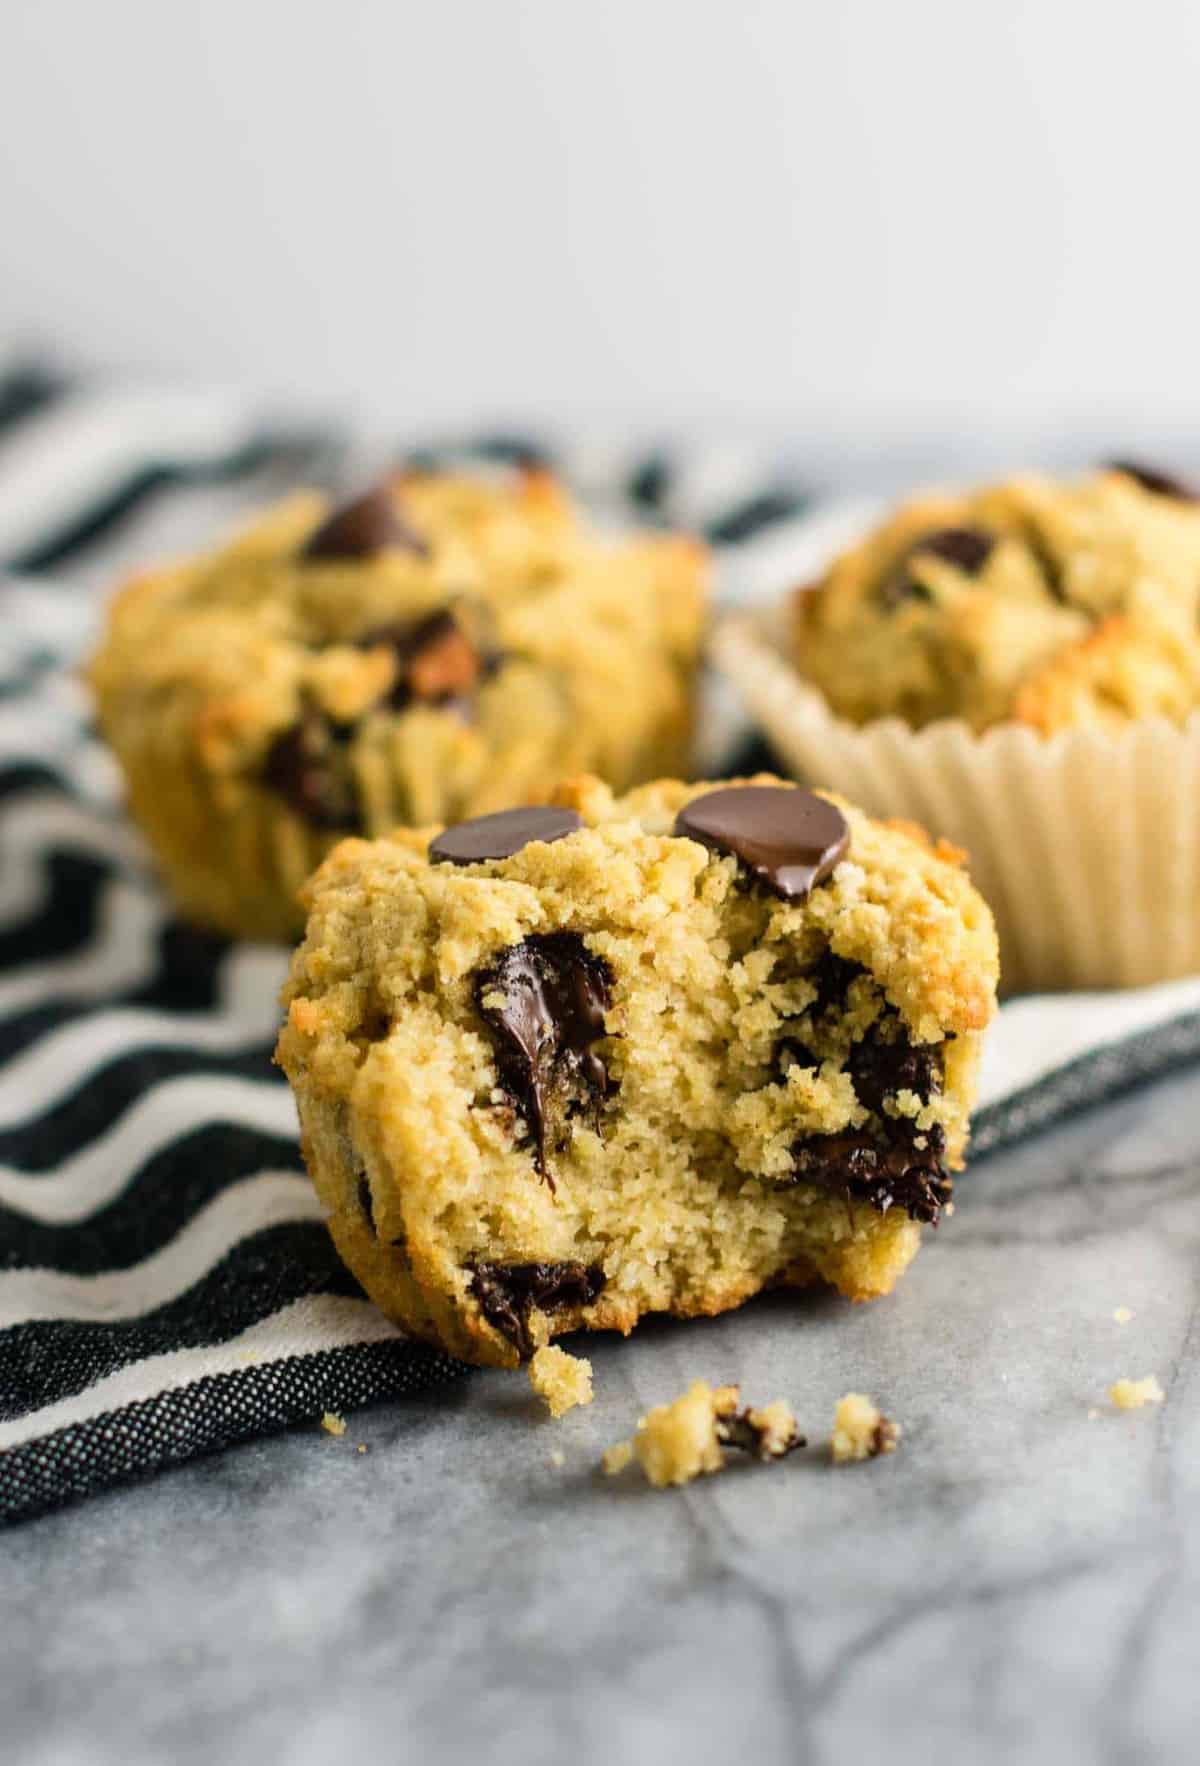 Gluten free chocolate chip muffins (dairy free) Made with coconut flour and oat flour and naturally sweetened! #breakfast #glutenfree #chocolatechipmuffins #glutenfreedairyfree #dairyfree